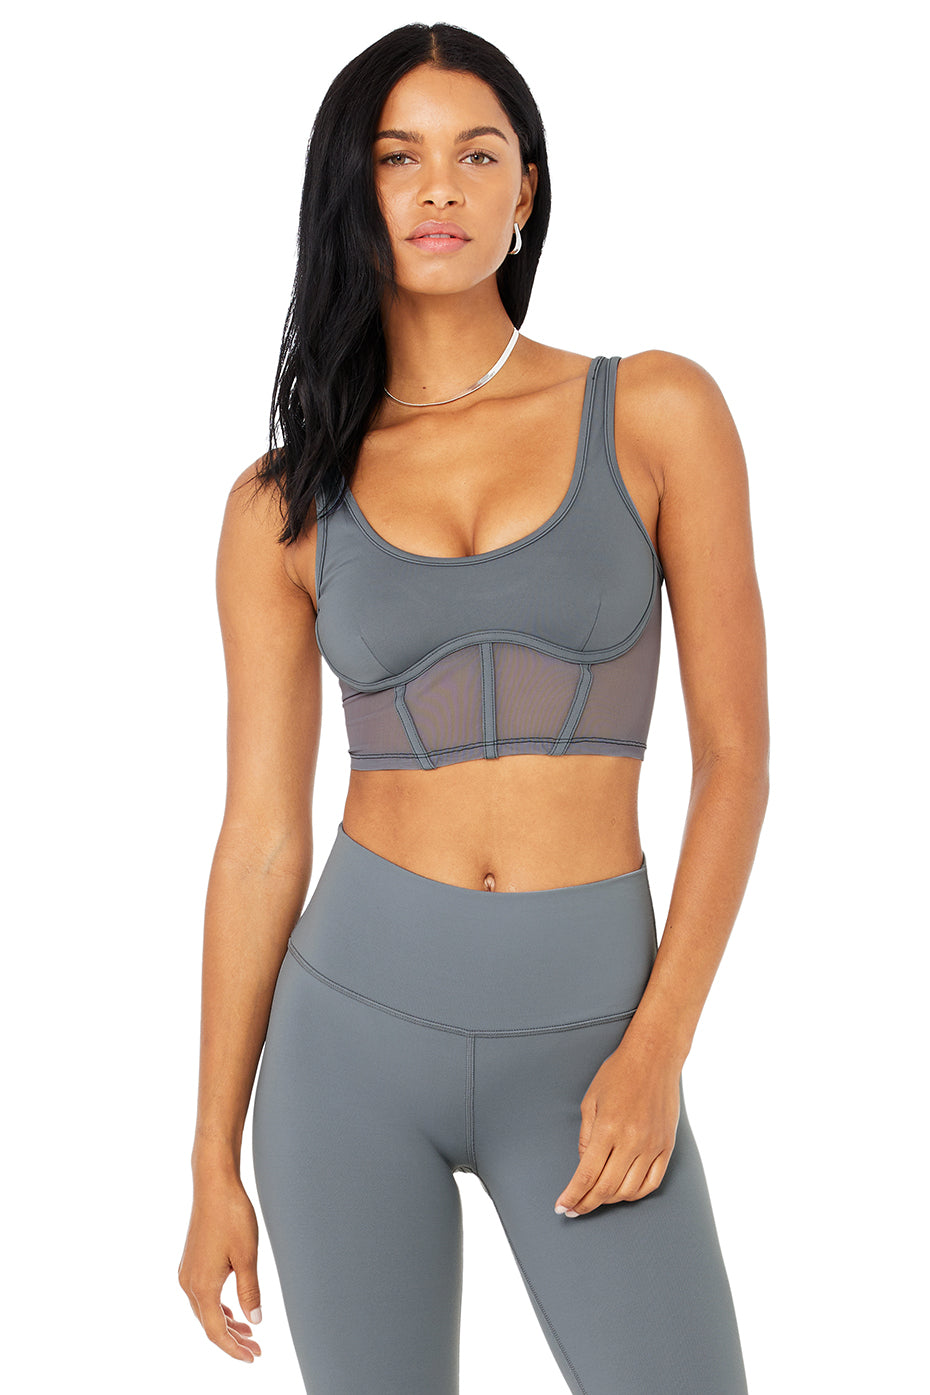 Airbrush Mesh Corset Tank Top in Steel Blue by Alo Yoga